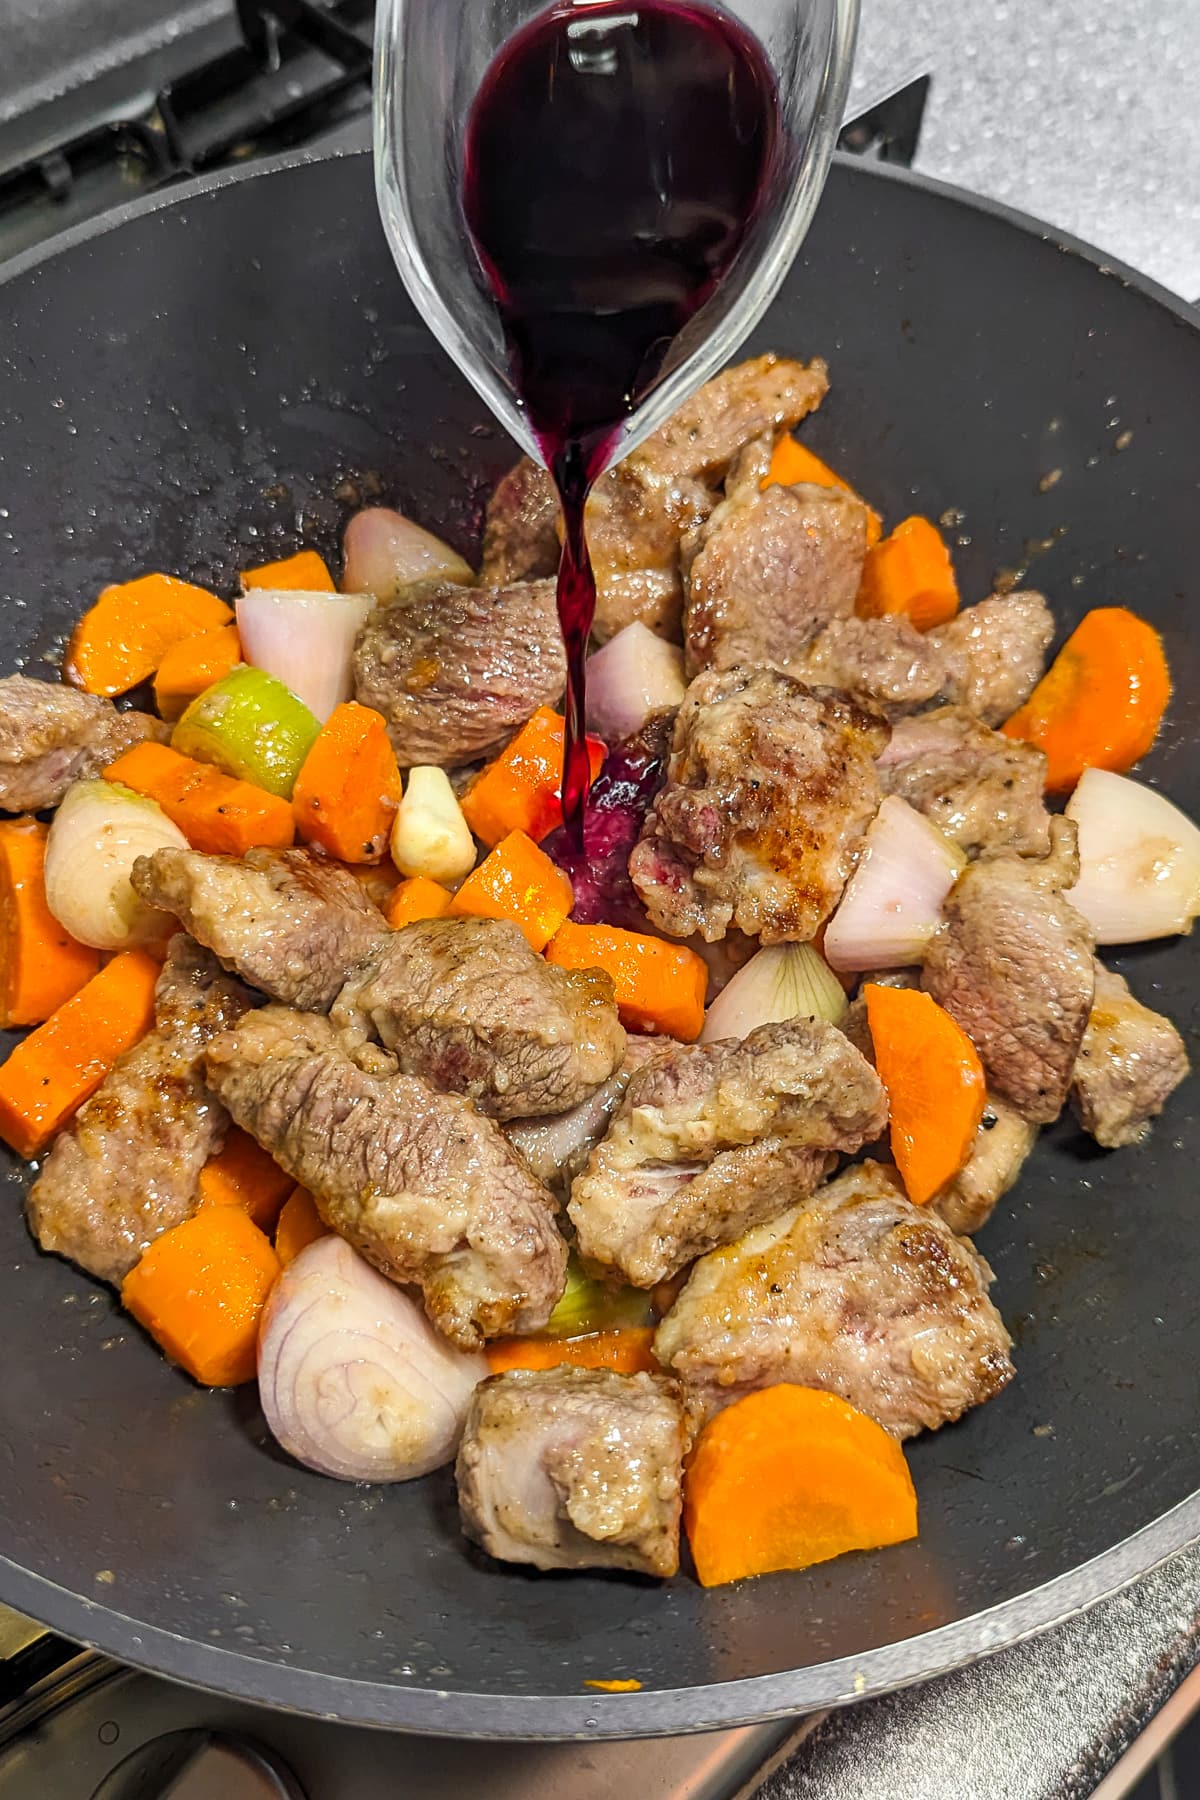 Pouring red wine in a wok with beef, carrots, onions.